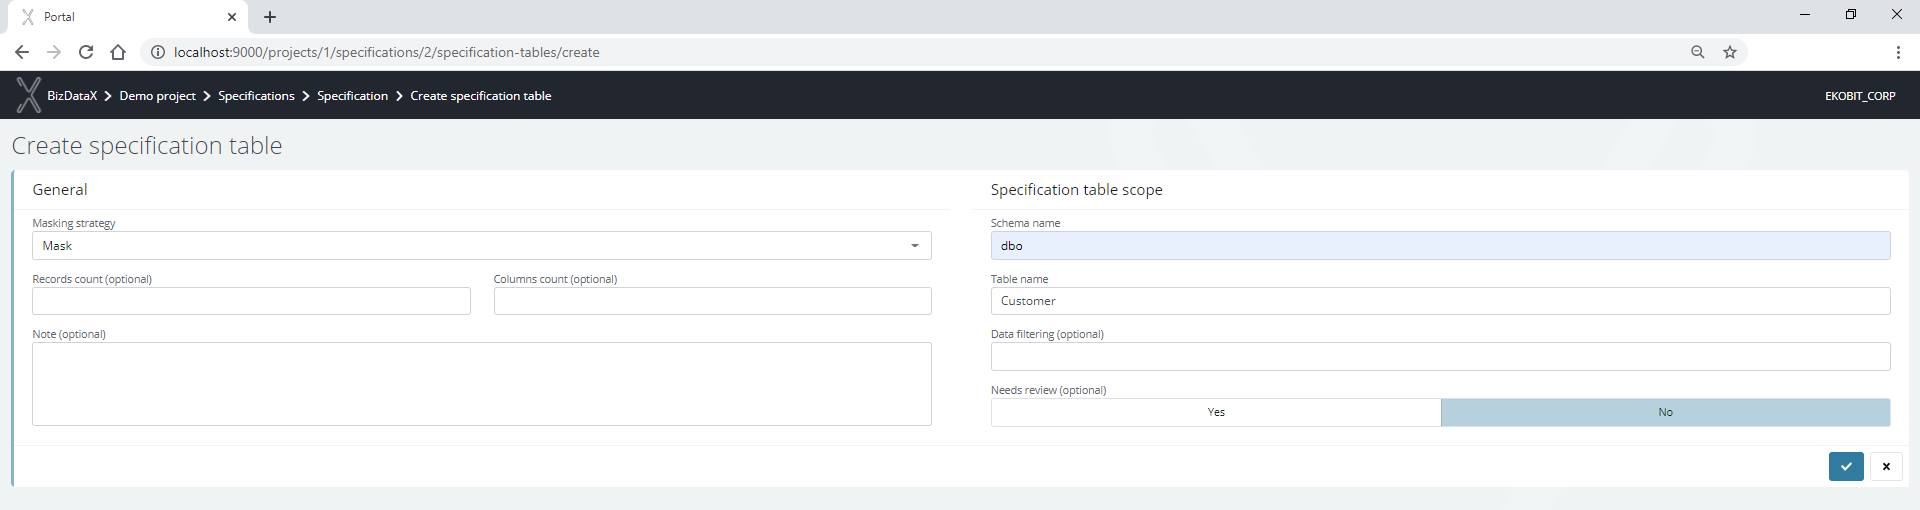 Create specification table